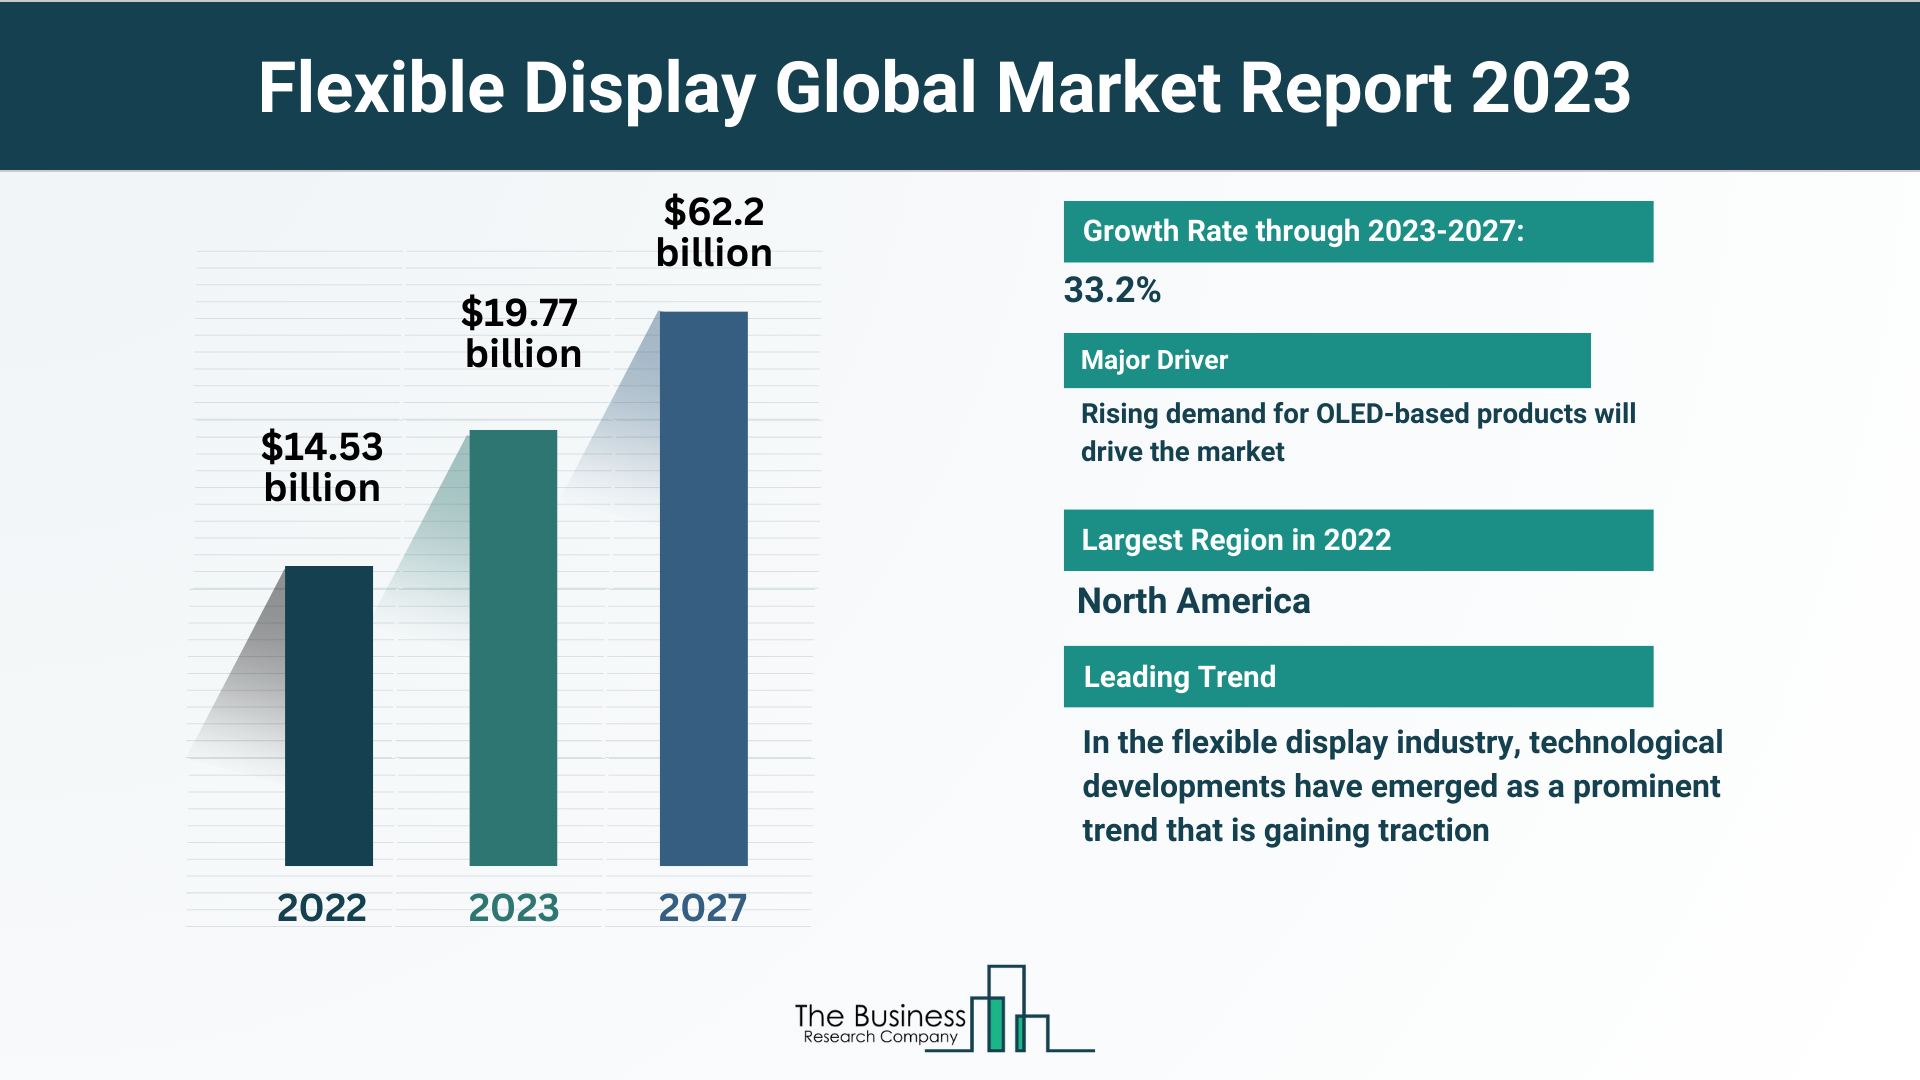 How Is the Flexible Display Market Expected To Grow Through 2023-2032?